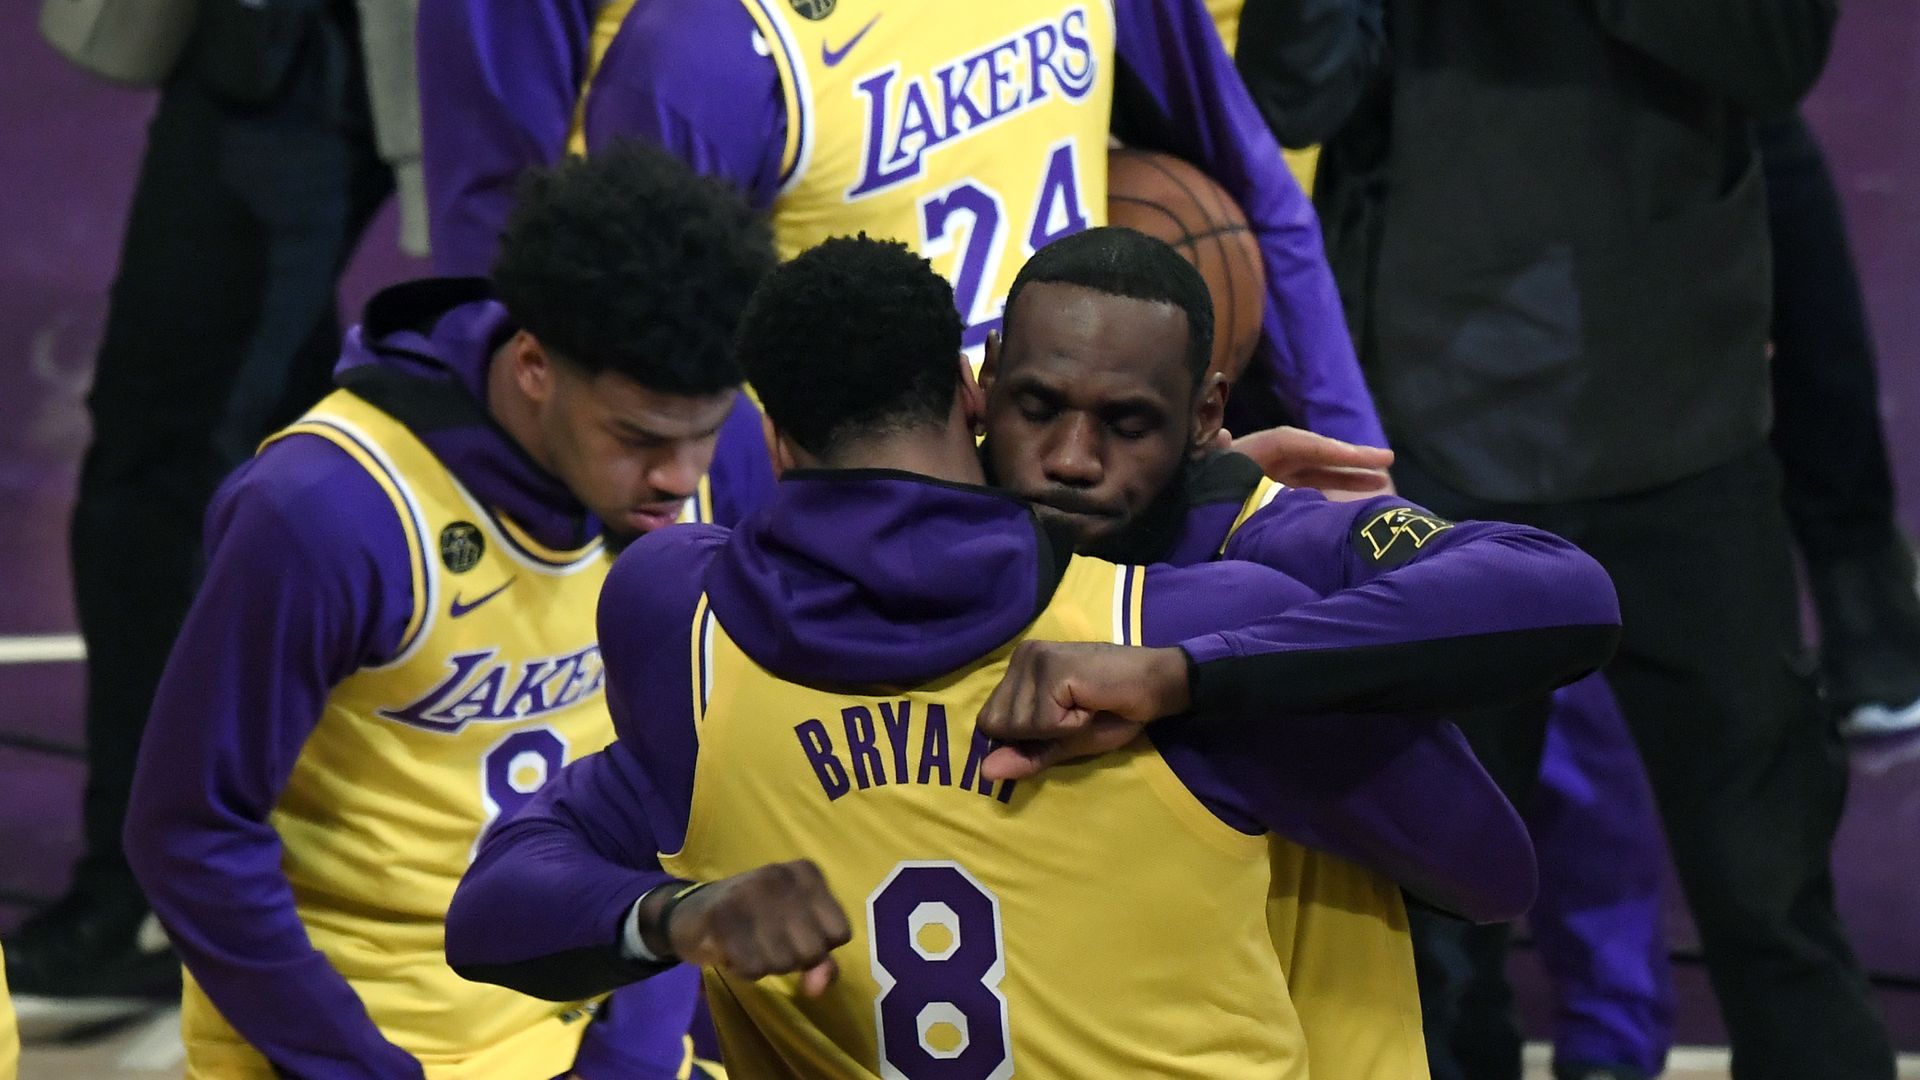 LeBron walks into Lakers-Blazers Game 4 with Kobe Bryant 8/24 jersey